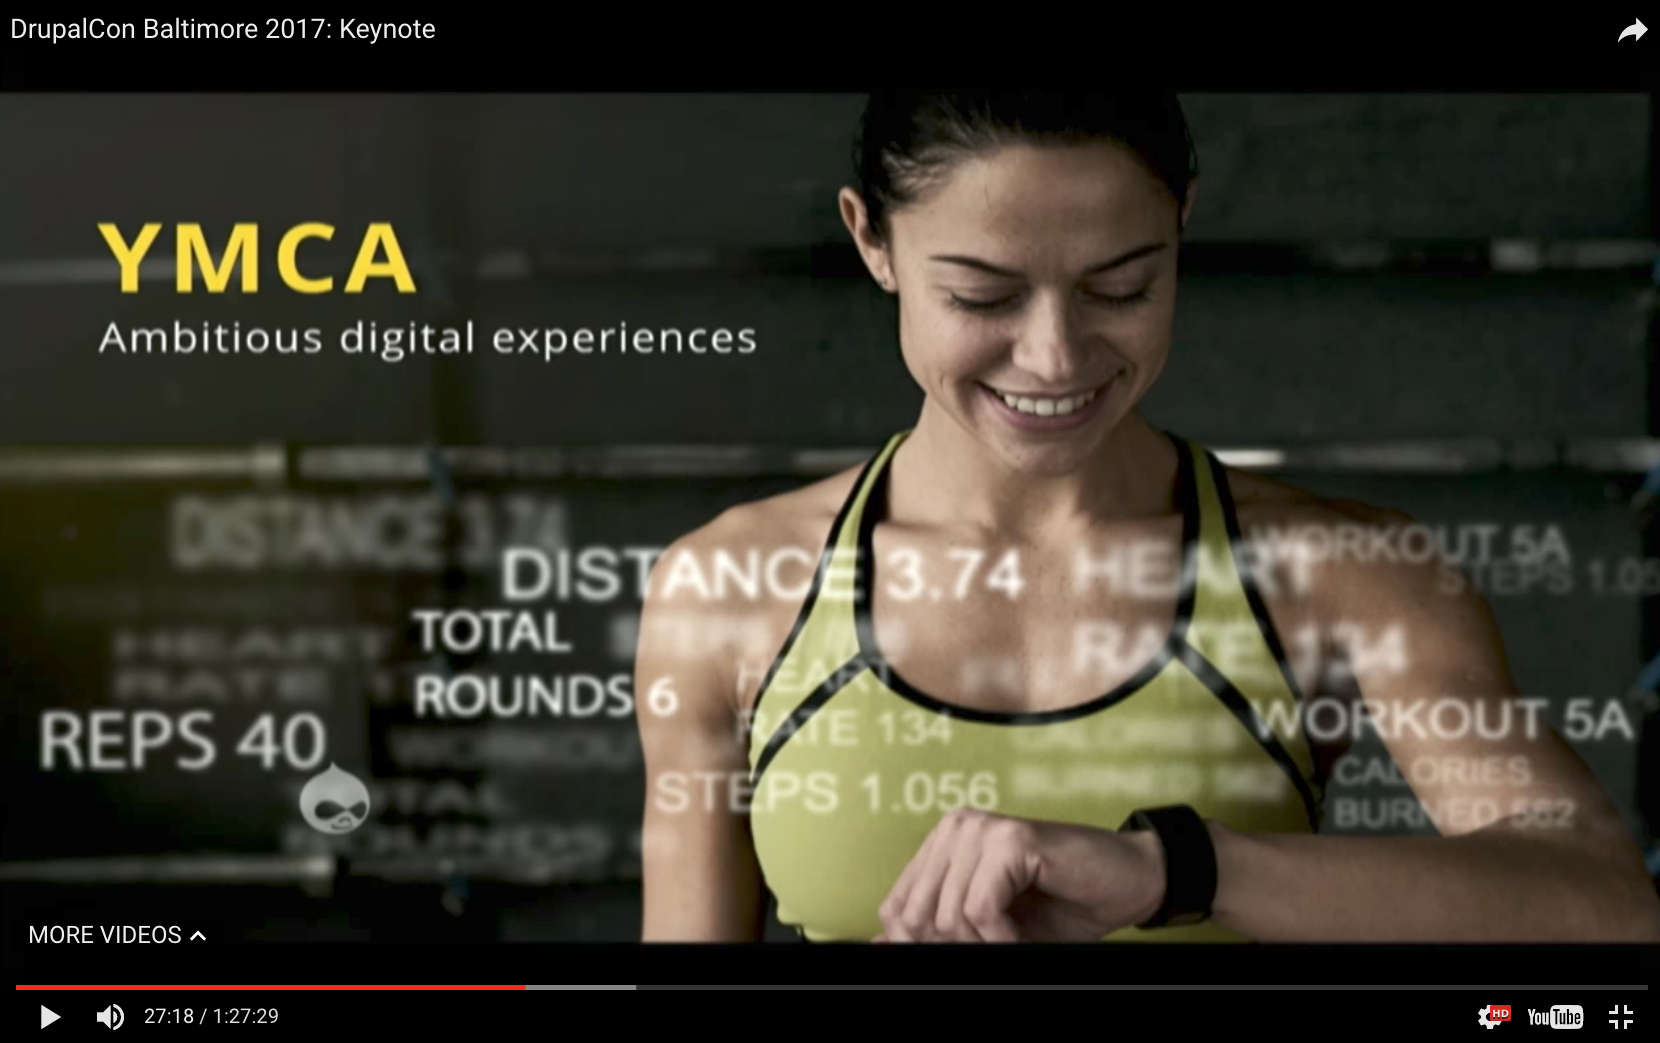 YMCA and Ambitious Digital Experiences